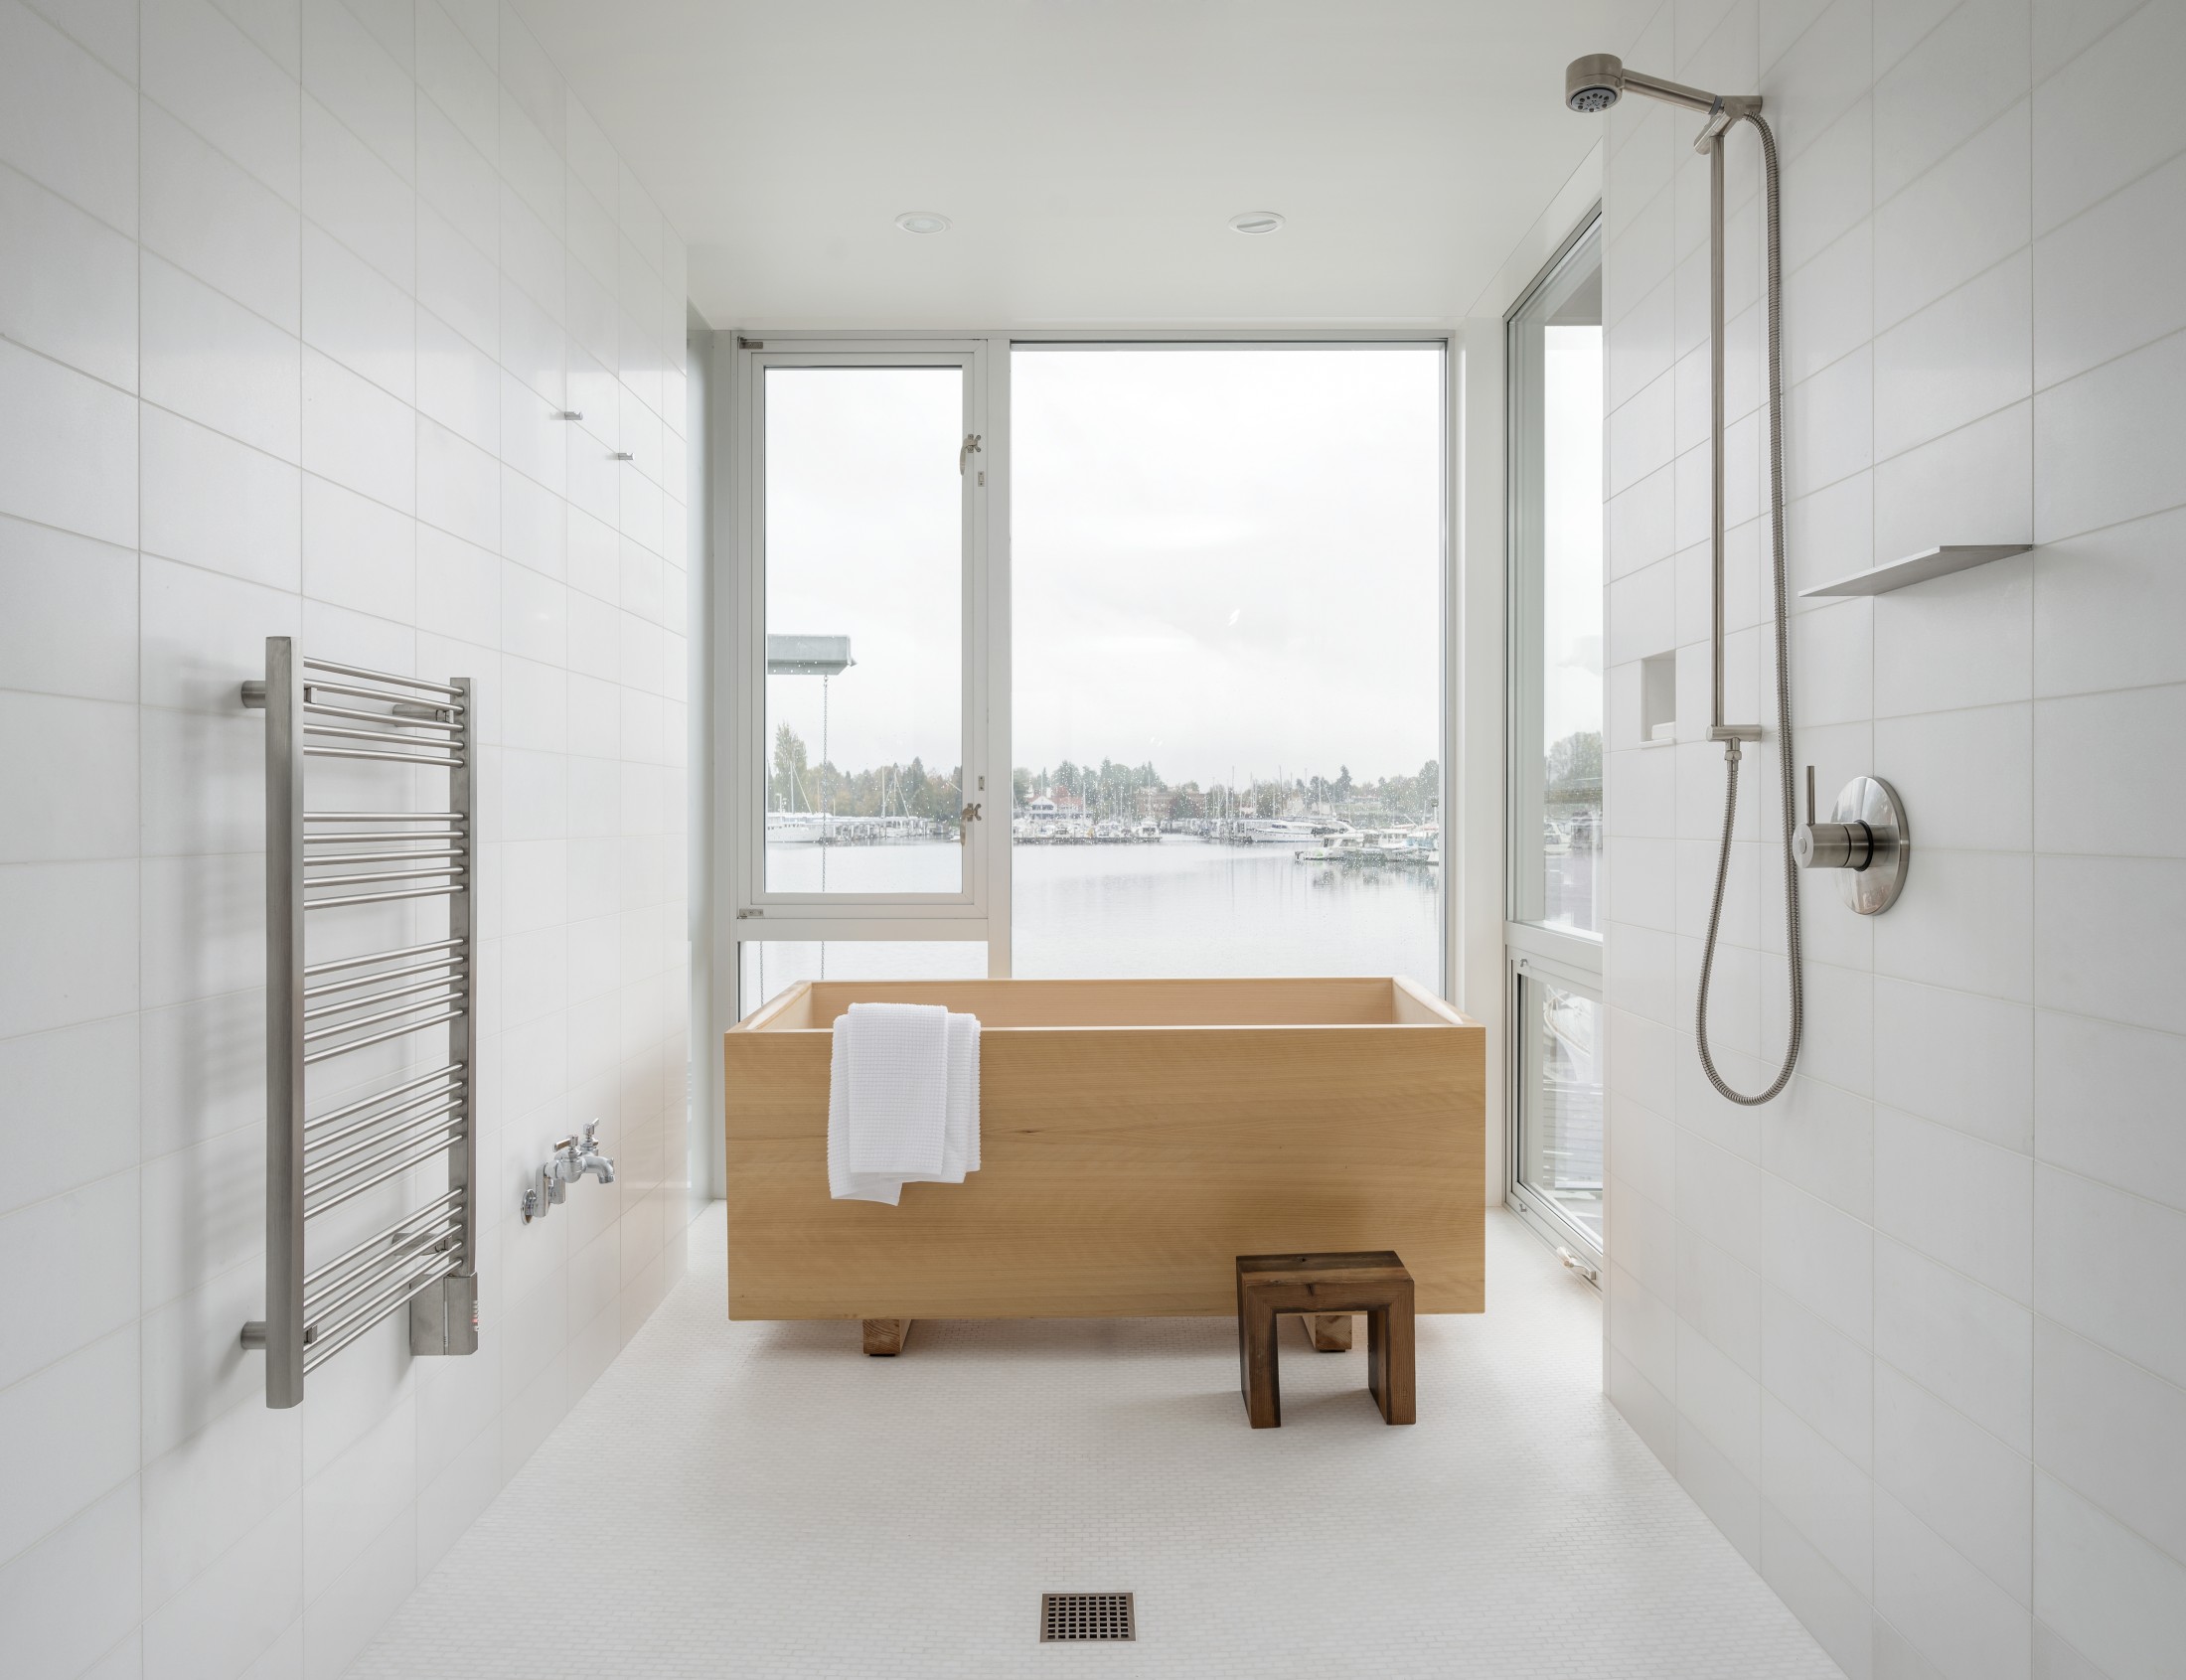 There's a master bathroom with gorgeous views and a wooden soak tub in Japanese style